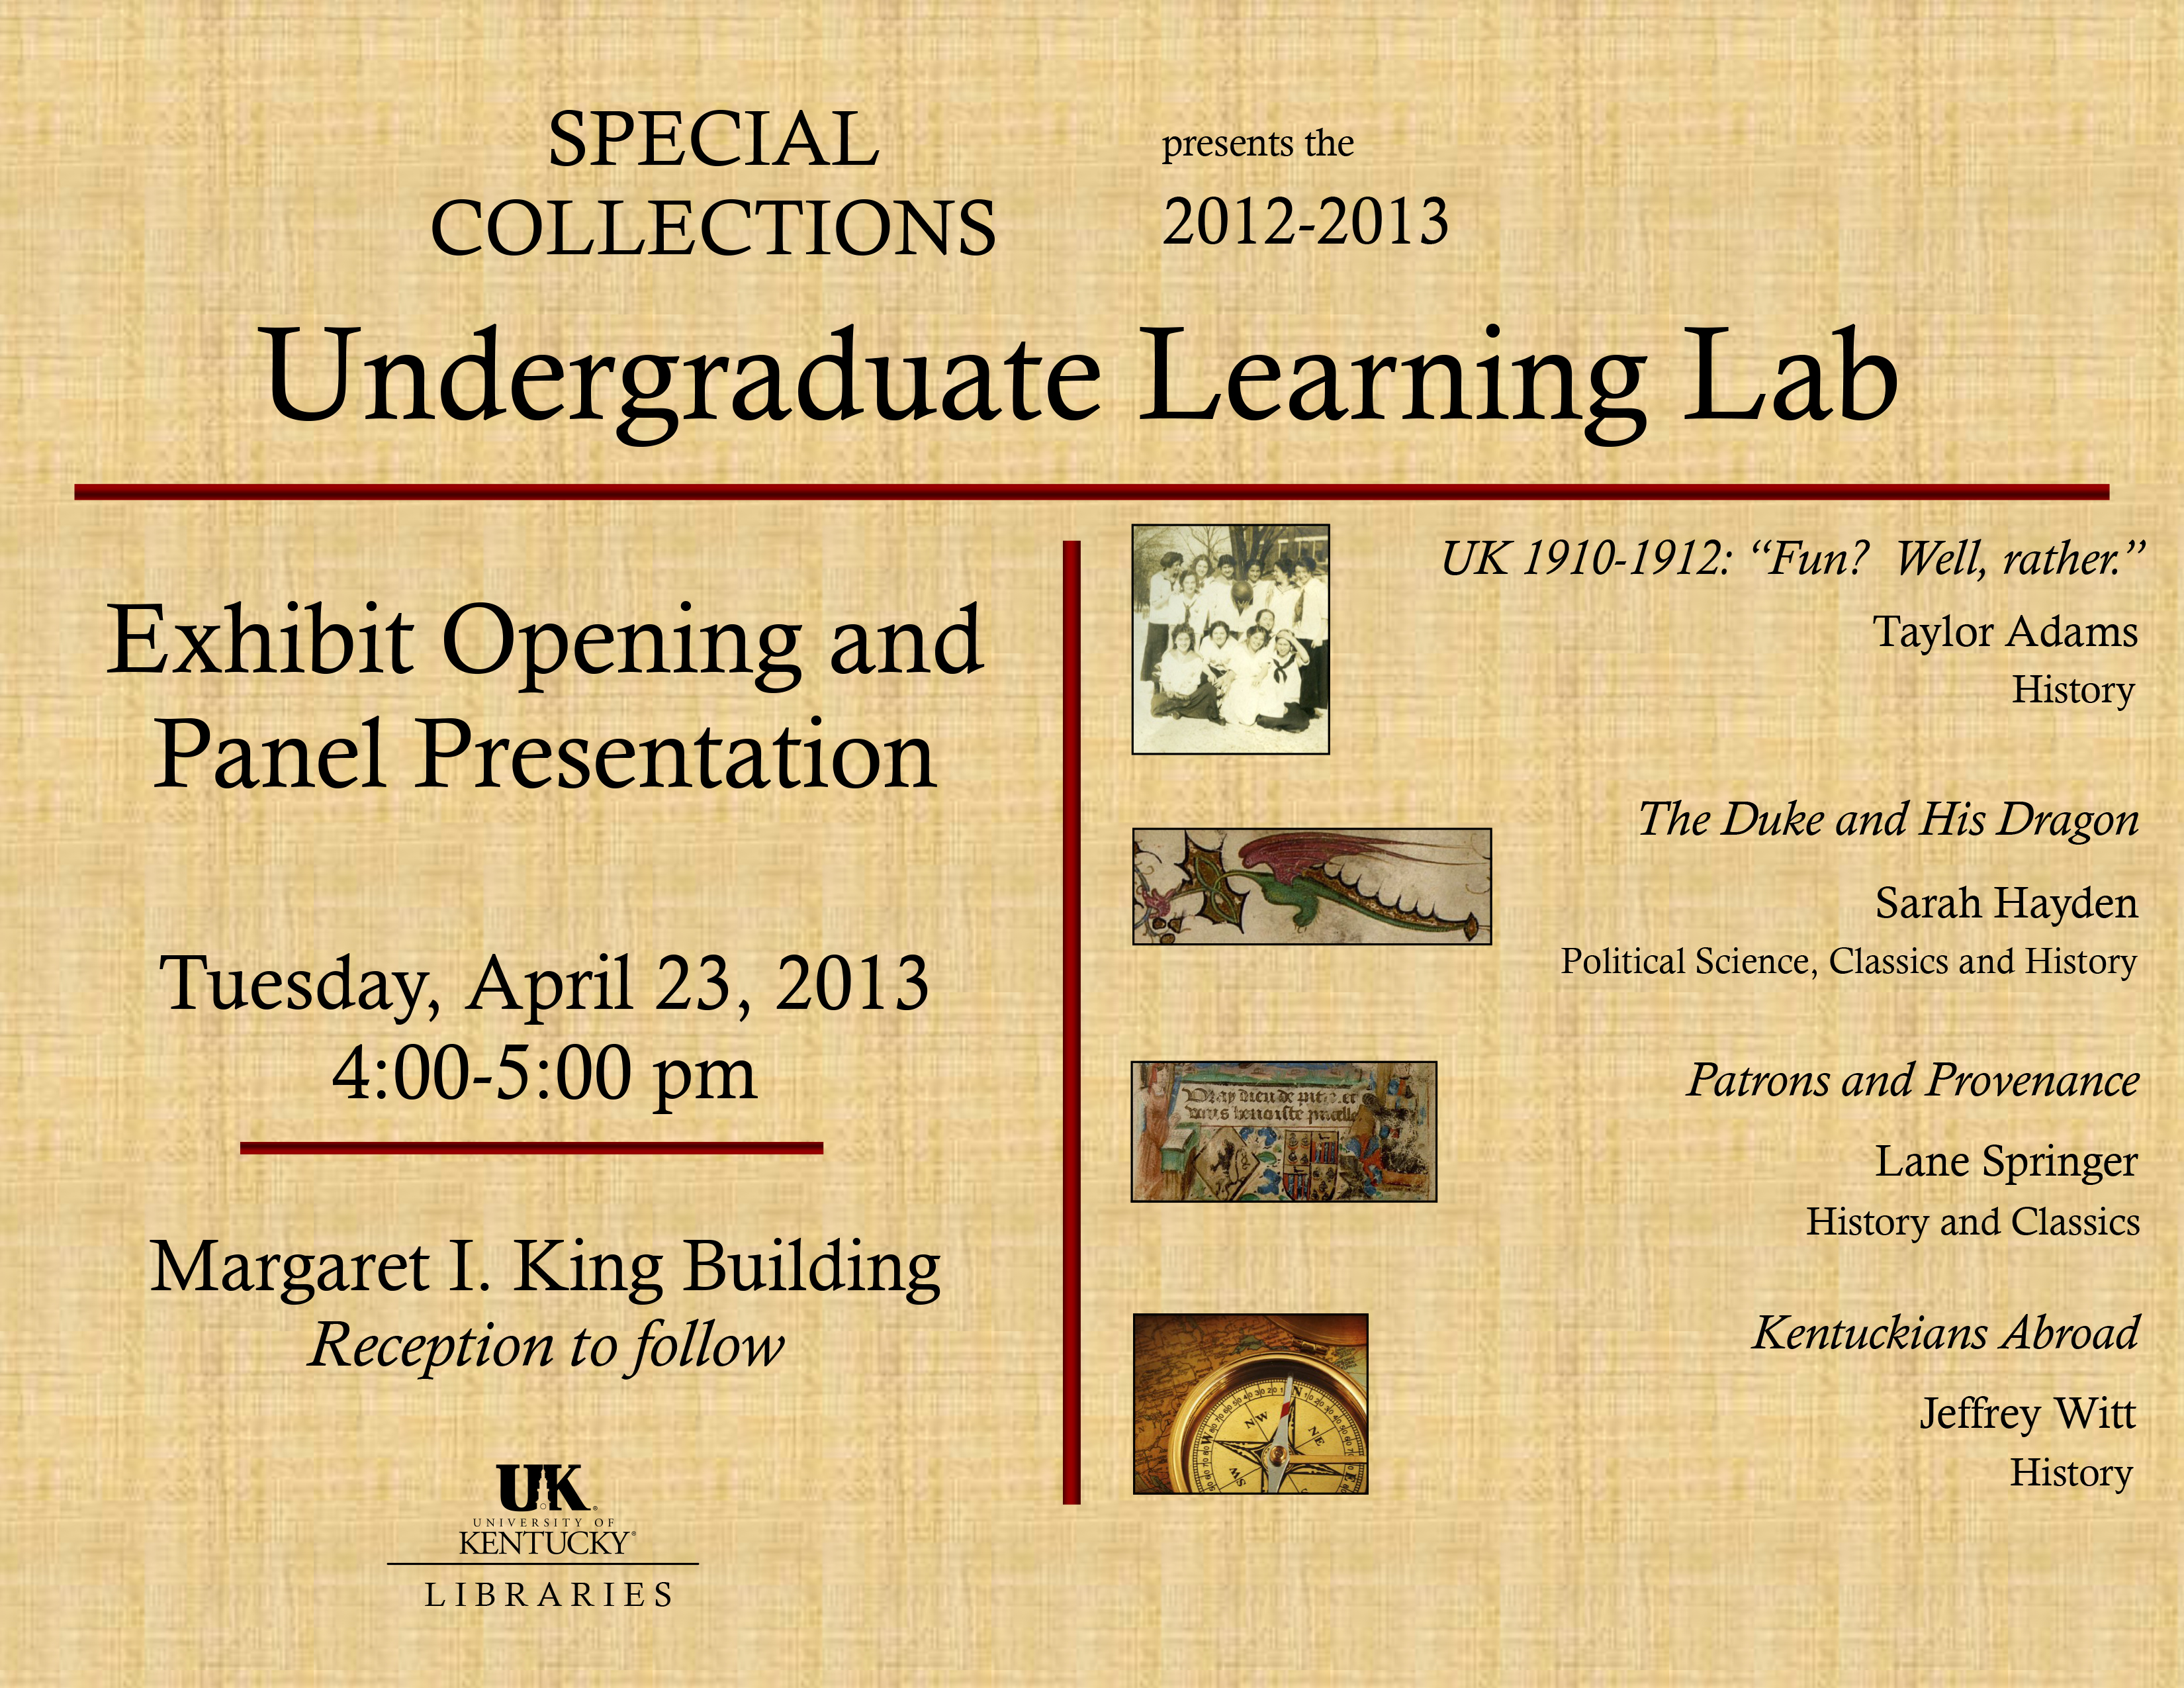 UK Special Collections will present a panel discussion and exhibition of their interns' work with historical and cultural documents in various collections at UK Libraries. Taylor Adams, Sarah Hayden, Lane Springer and Jeffrey Witt will discuss their Learning Lab projects and experiences at a panel presentation starting at 4 p.m. Tuesday, April 23, with the exhibit opening reception to follow at 5 p.m.